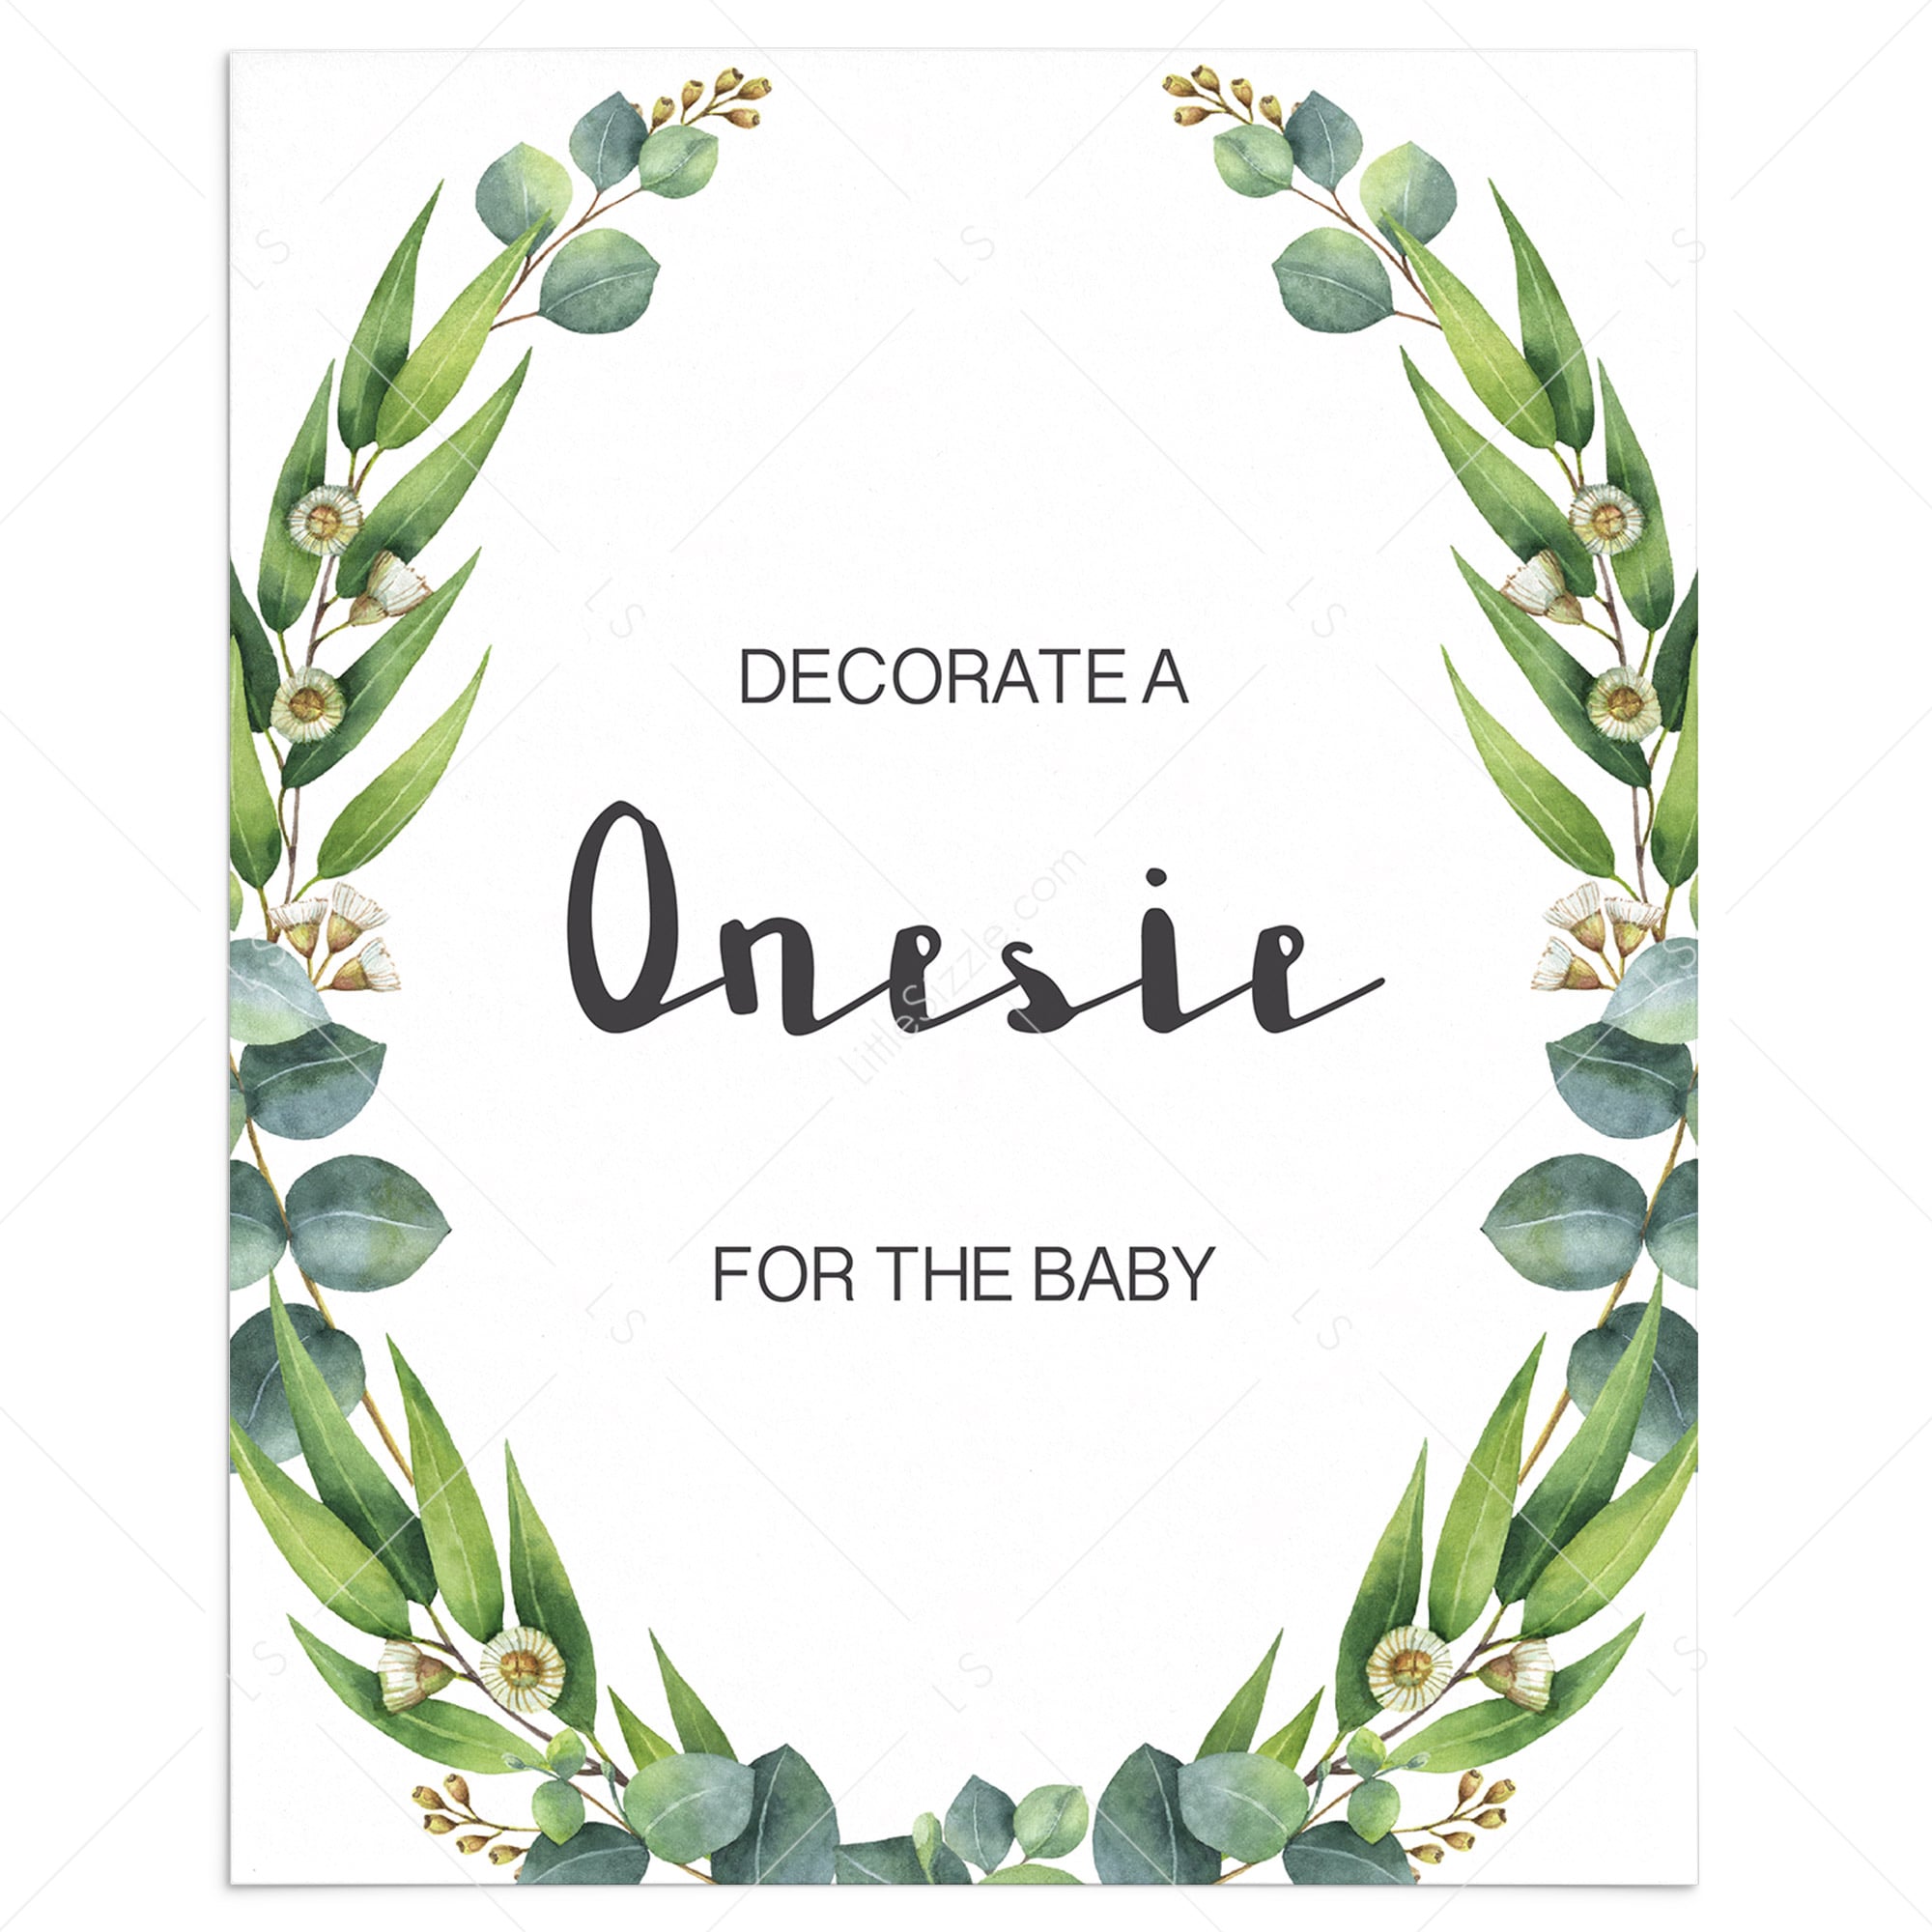 Onesie decorating station greenery baby shower printable by LittleSizzle